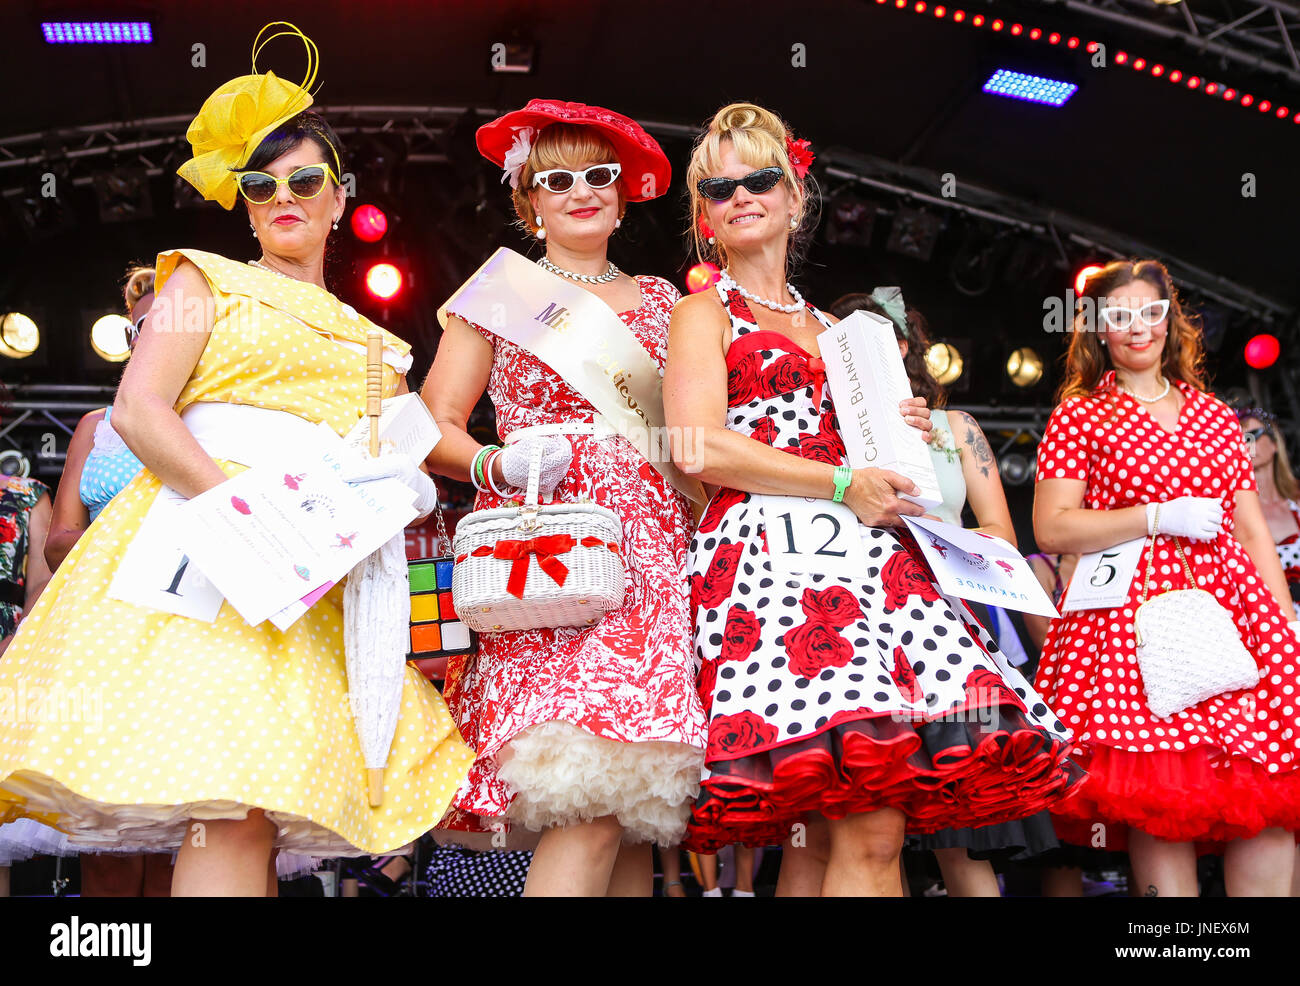 Wettenberg, Germany. 30th July, 2017. Miss Petticoat Contest at Golden Oldies Festival in Wettenberg, Germany. Miss Petticoat 2017 is Britta Ullmann (middle), from Giessen, Hesse, Germany. 3rd place: Viola Kornfeld (front left, no 1, yellow dress), from Bad Hersfeld, Hesse, Germany. 2nd place: Anke Beger (front right, no.12), from Freiberg, Saxony, Germany. The Golden Oldies Festival is an annual nostalgic festival (est. in 1989) with focus on 1950s to1970s, over 1000 exhibited classic cars and old-timers, over 50 live bands. Credit: Christian Lademann Stock Photo